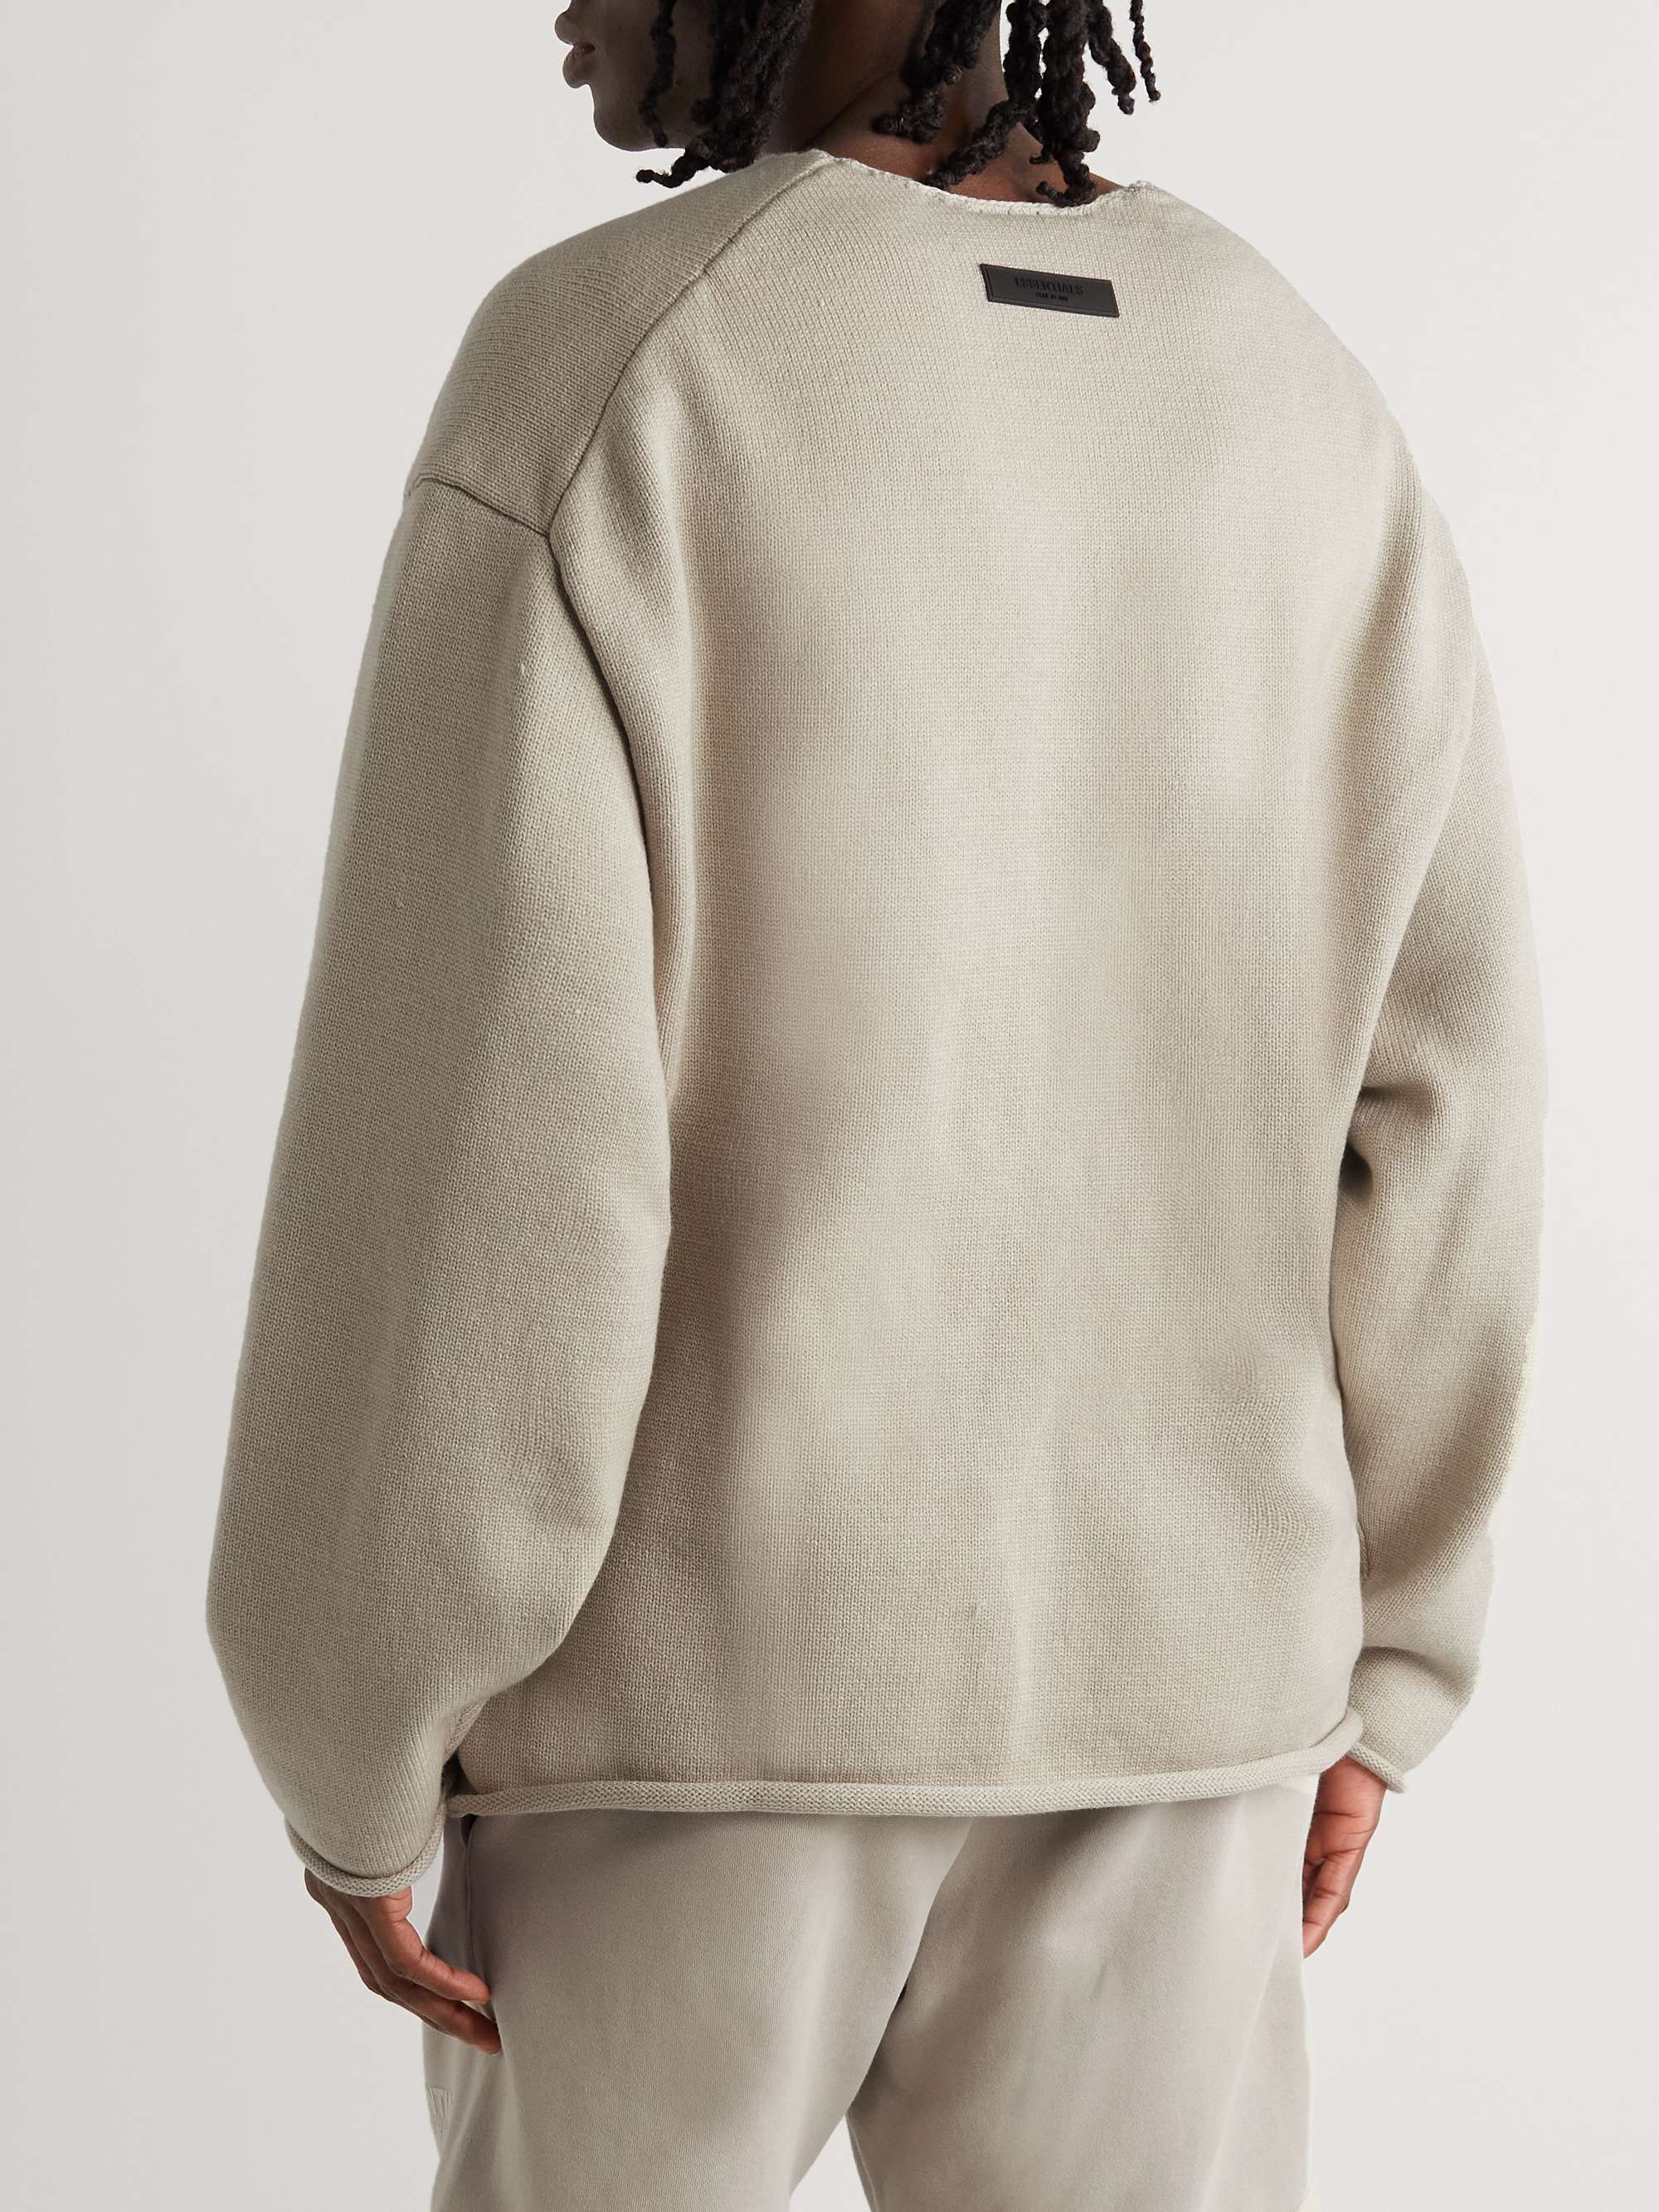 2020 FEAR OF GOD ESSENTIALS FOG LOGO Letter Print Lovers bottoming sweater